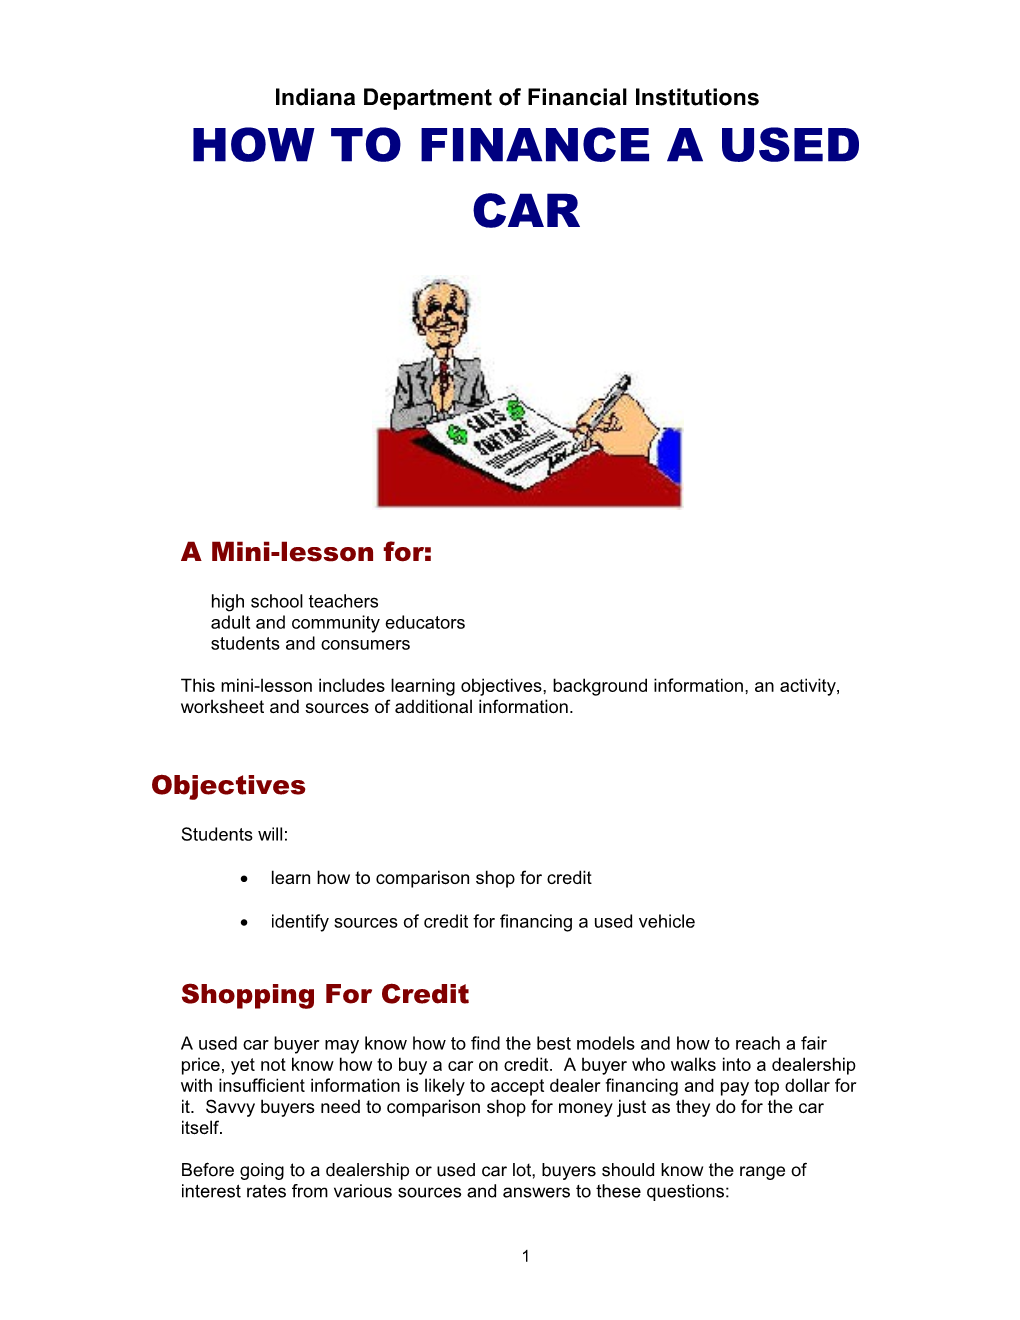 How to Finance a Used Car